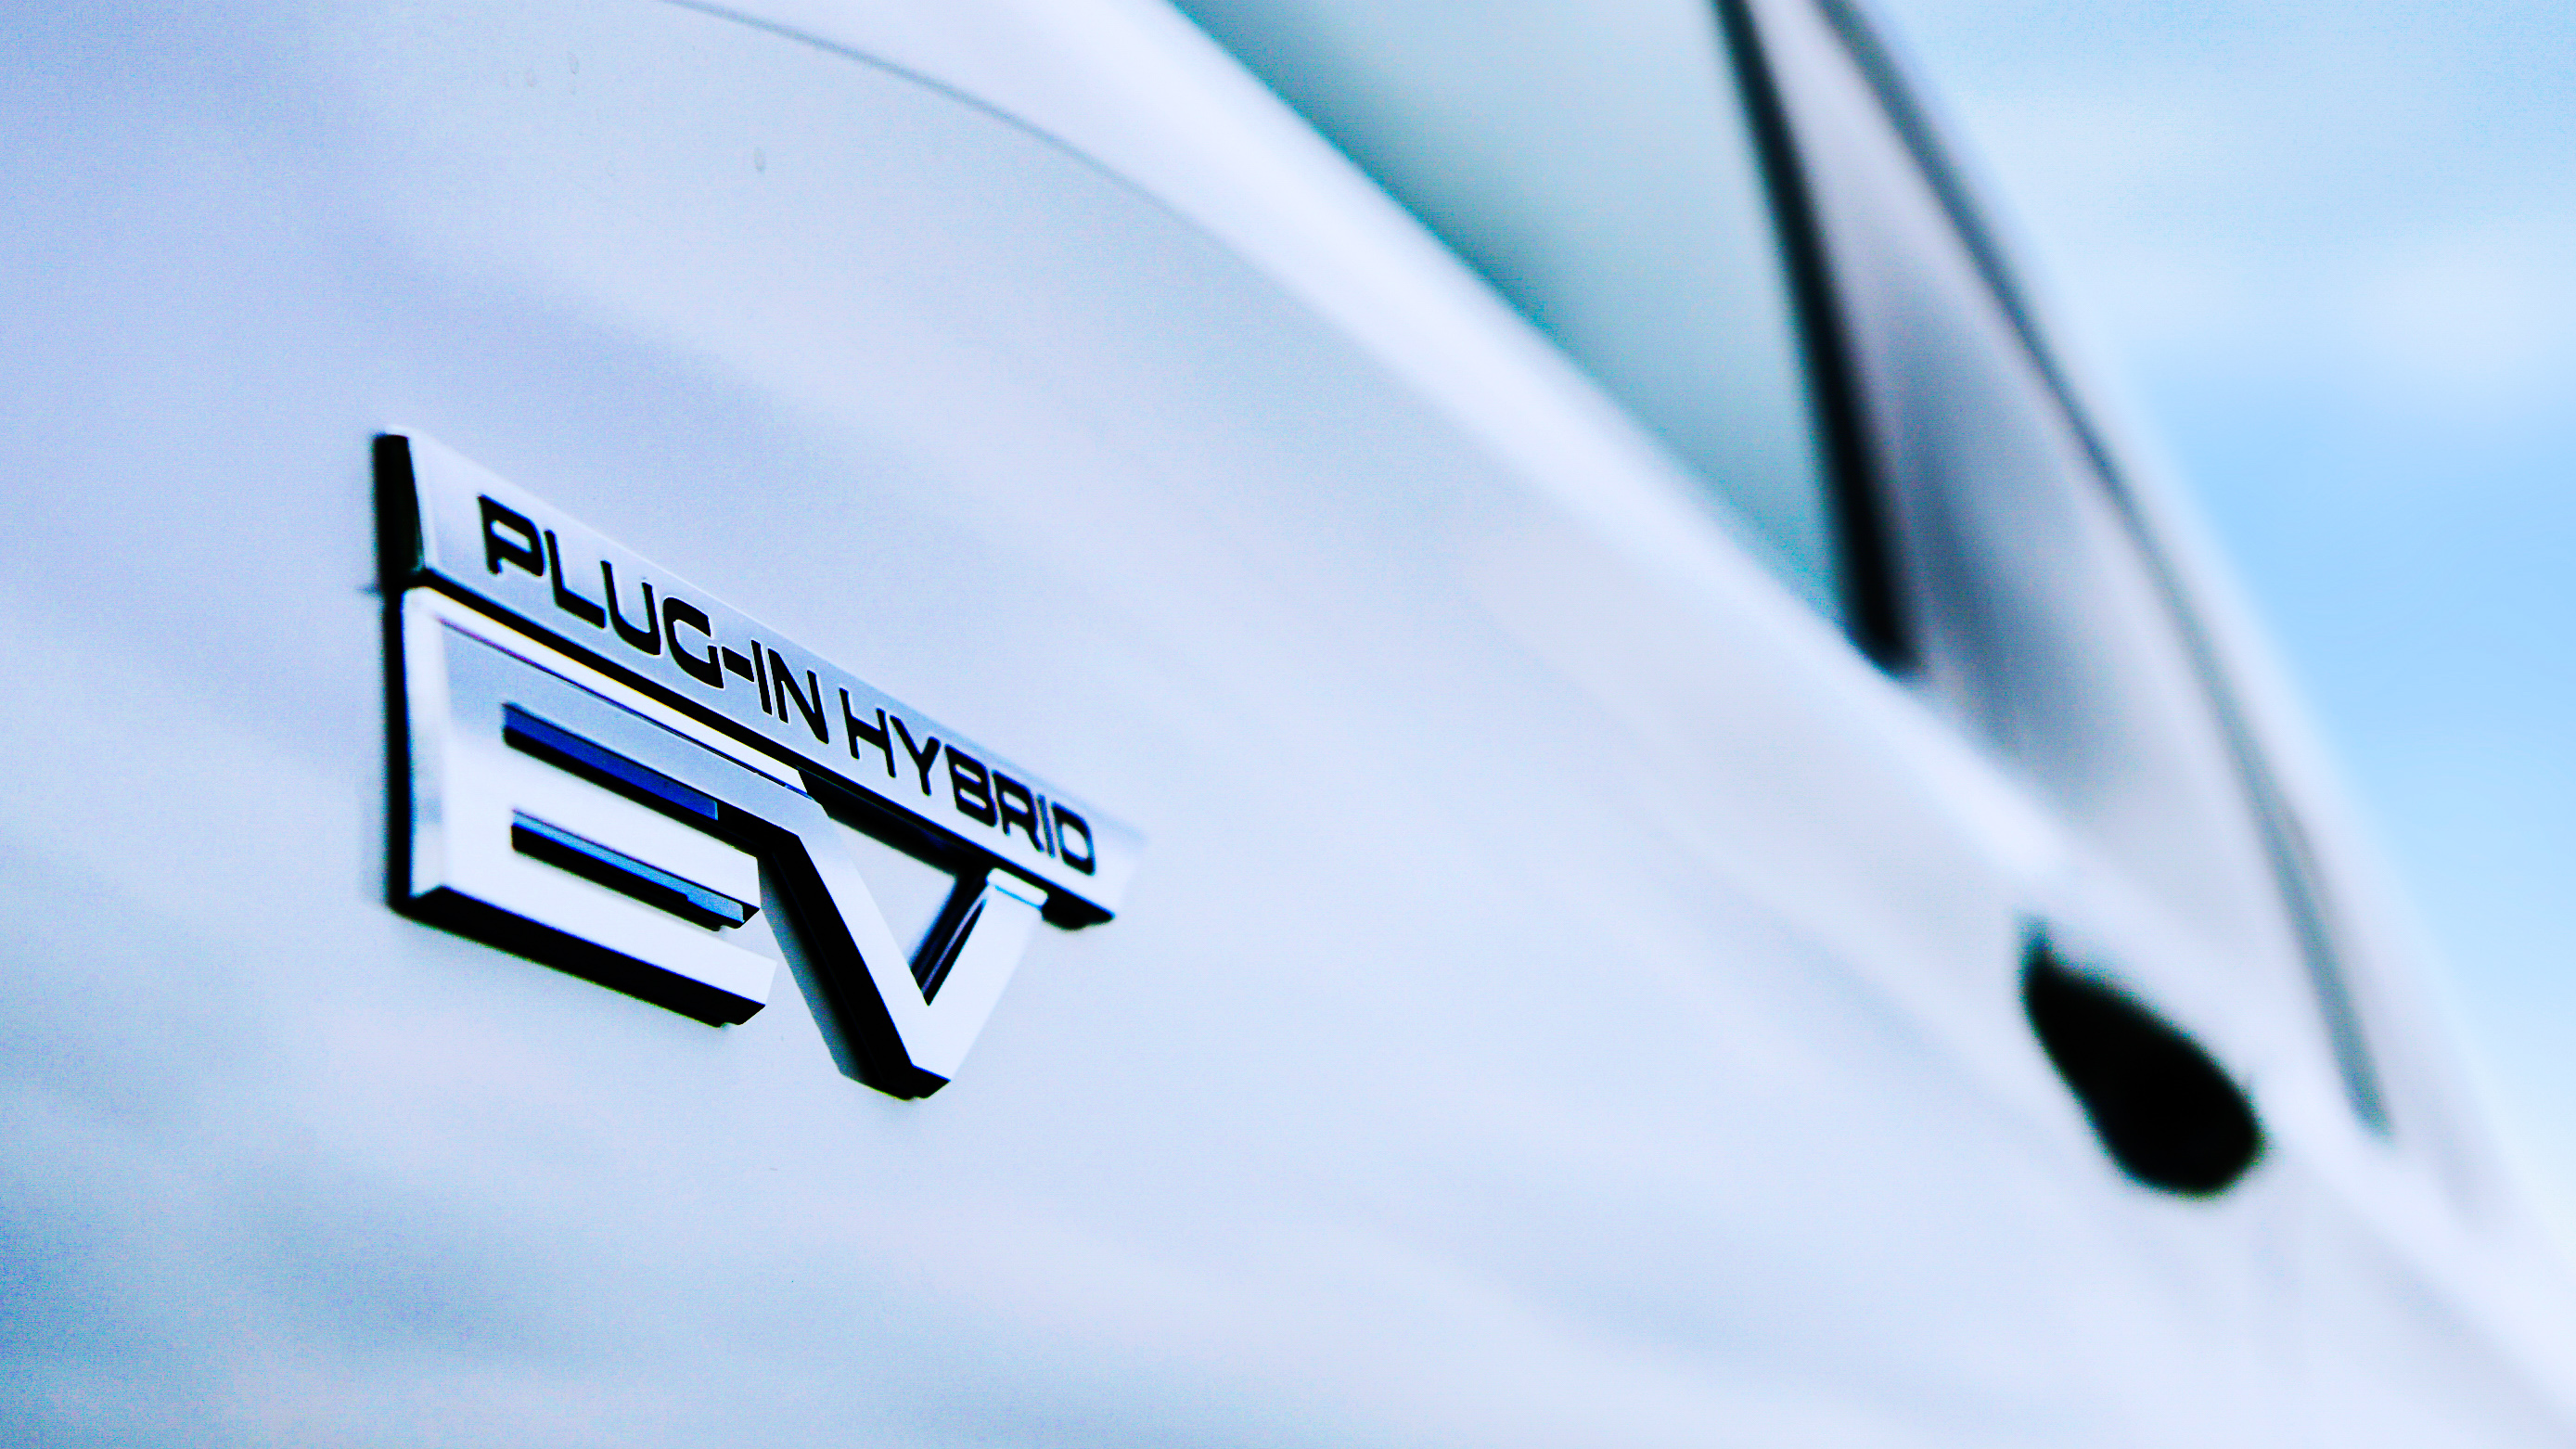 A close-up of the Plug-in Hybrid badge on the Mitsubishi Outlander PHEV